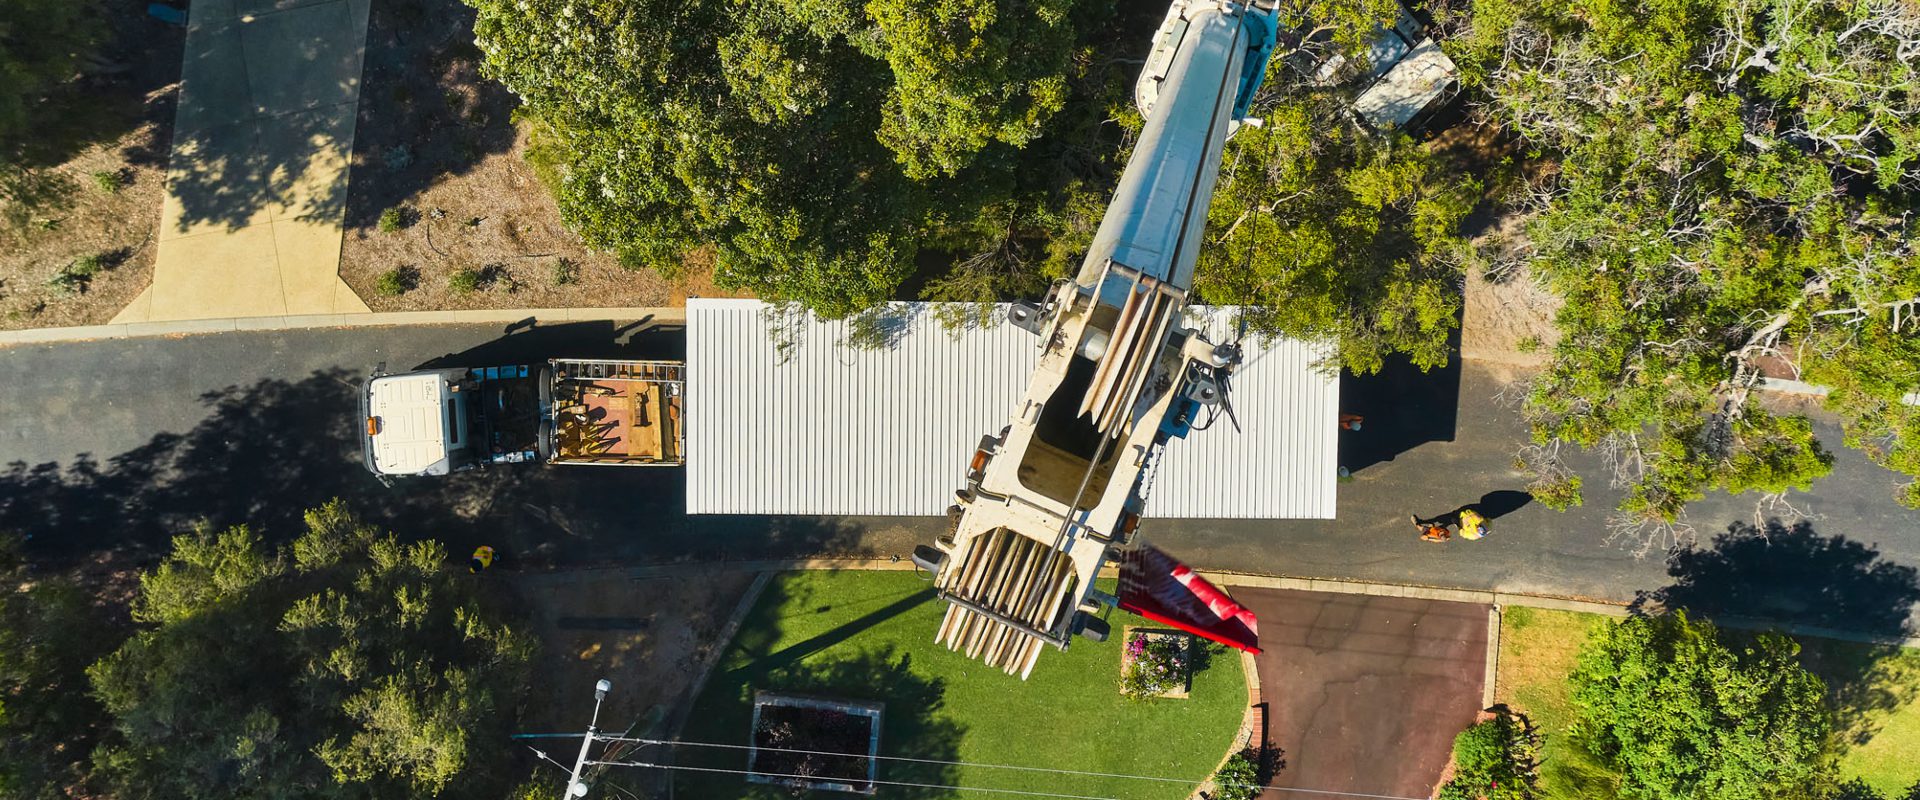 aerial view of fox granny flat being relocated by a crane